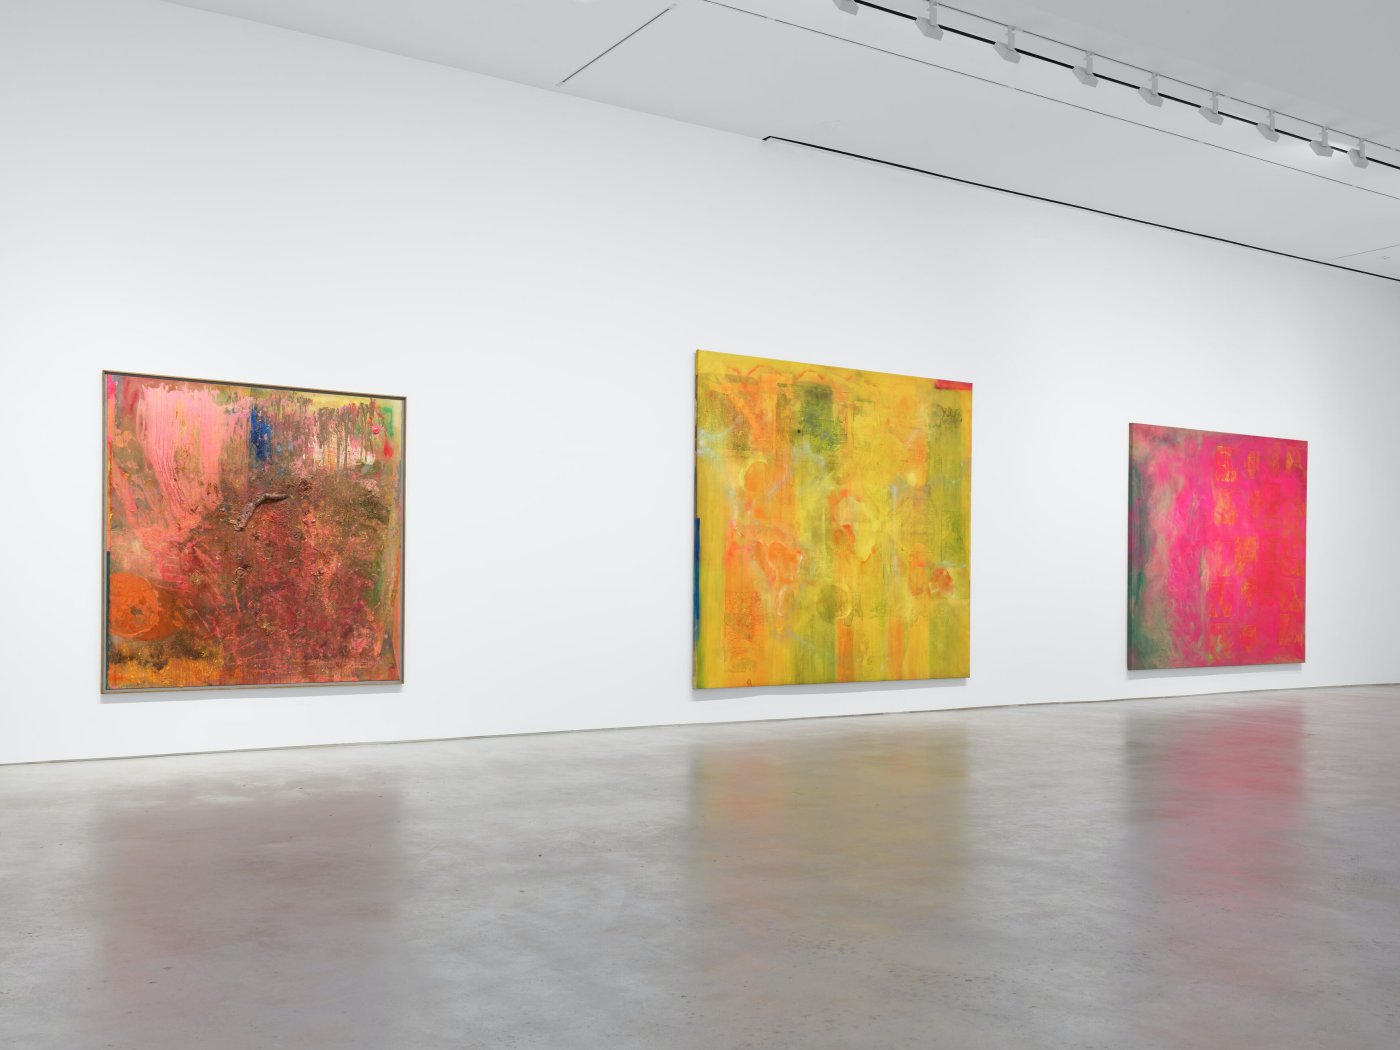 Installation image for Frank Bowling - London / New York, at Hauser & Wirth